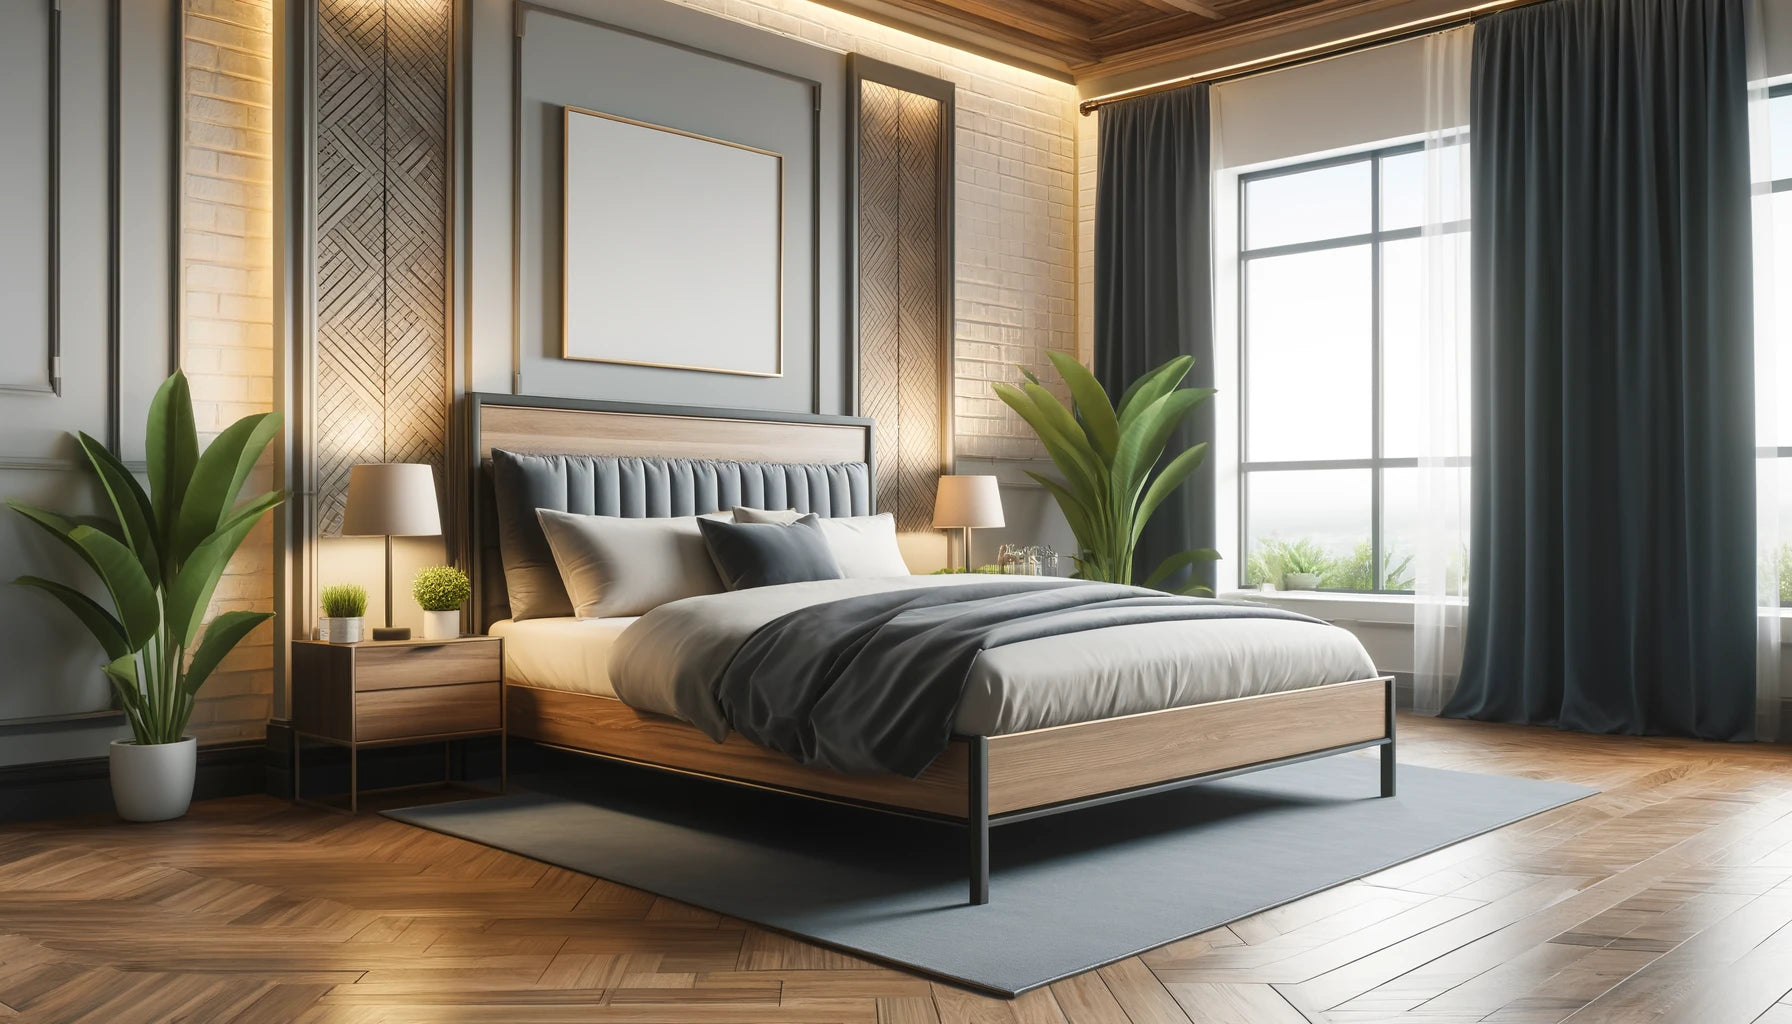 California King Bed Frame vs King: Choosing the Right Size